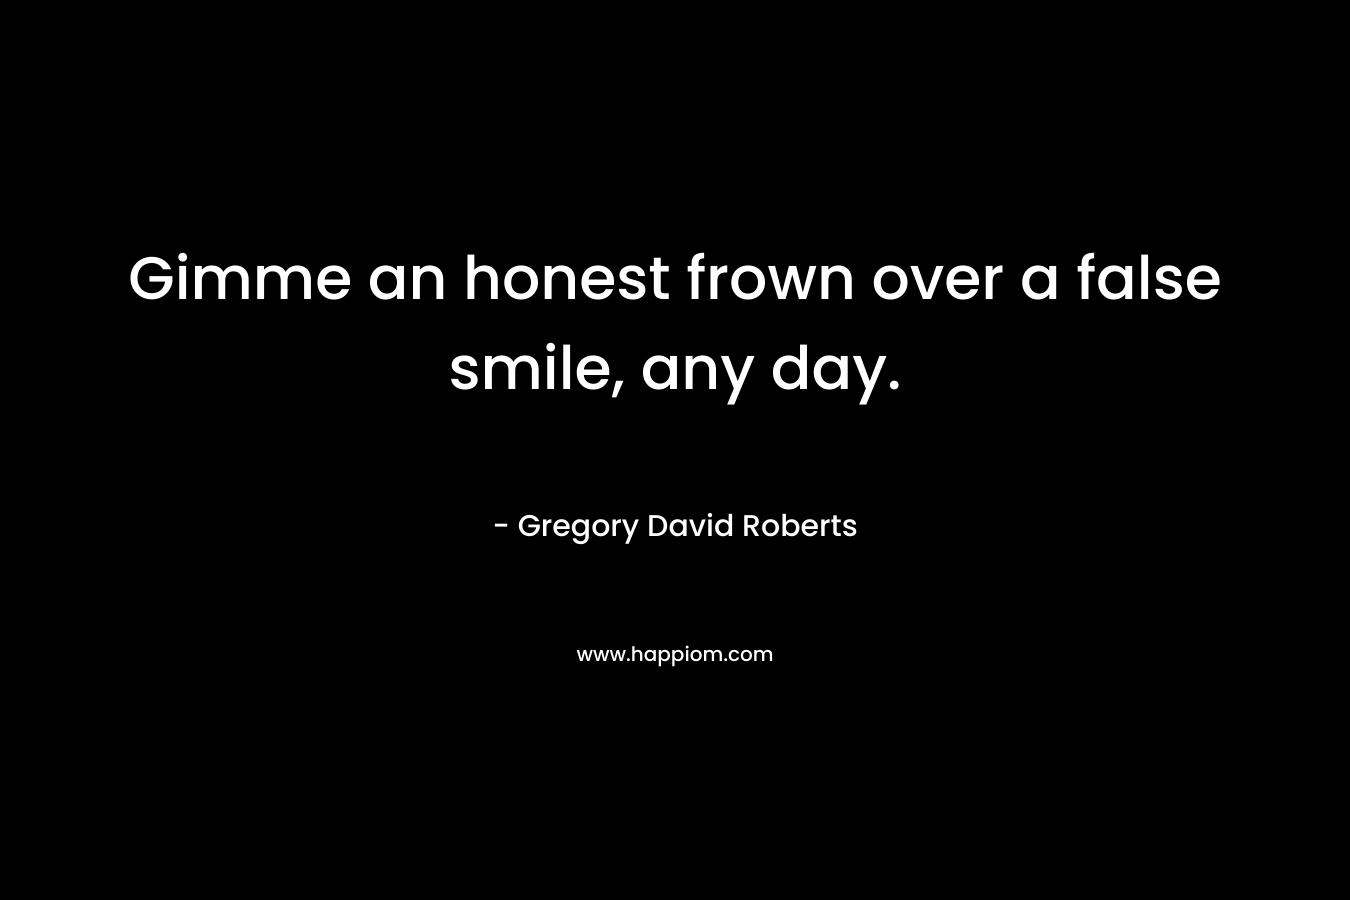 Gimme an honest frown over a false smile, any day. – Gregory David Roberts